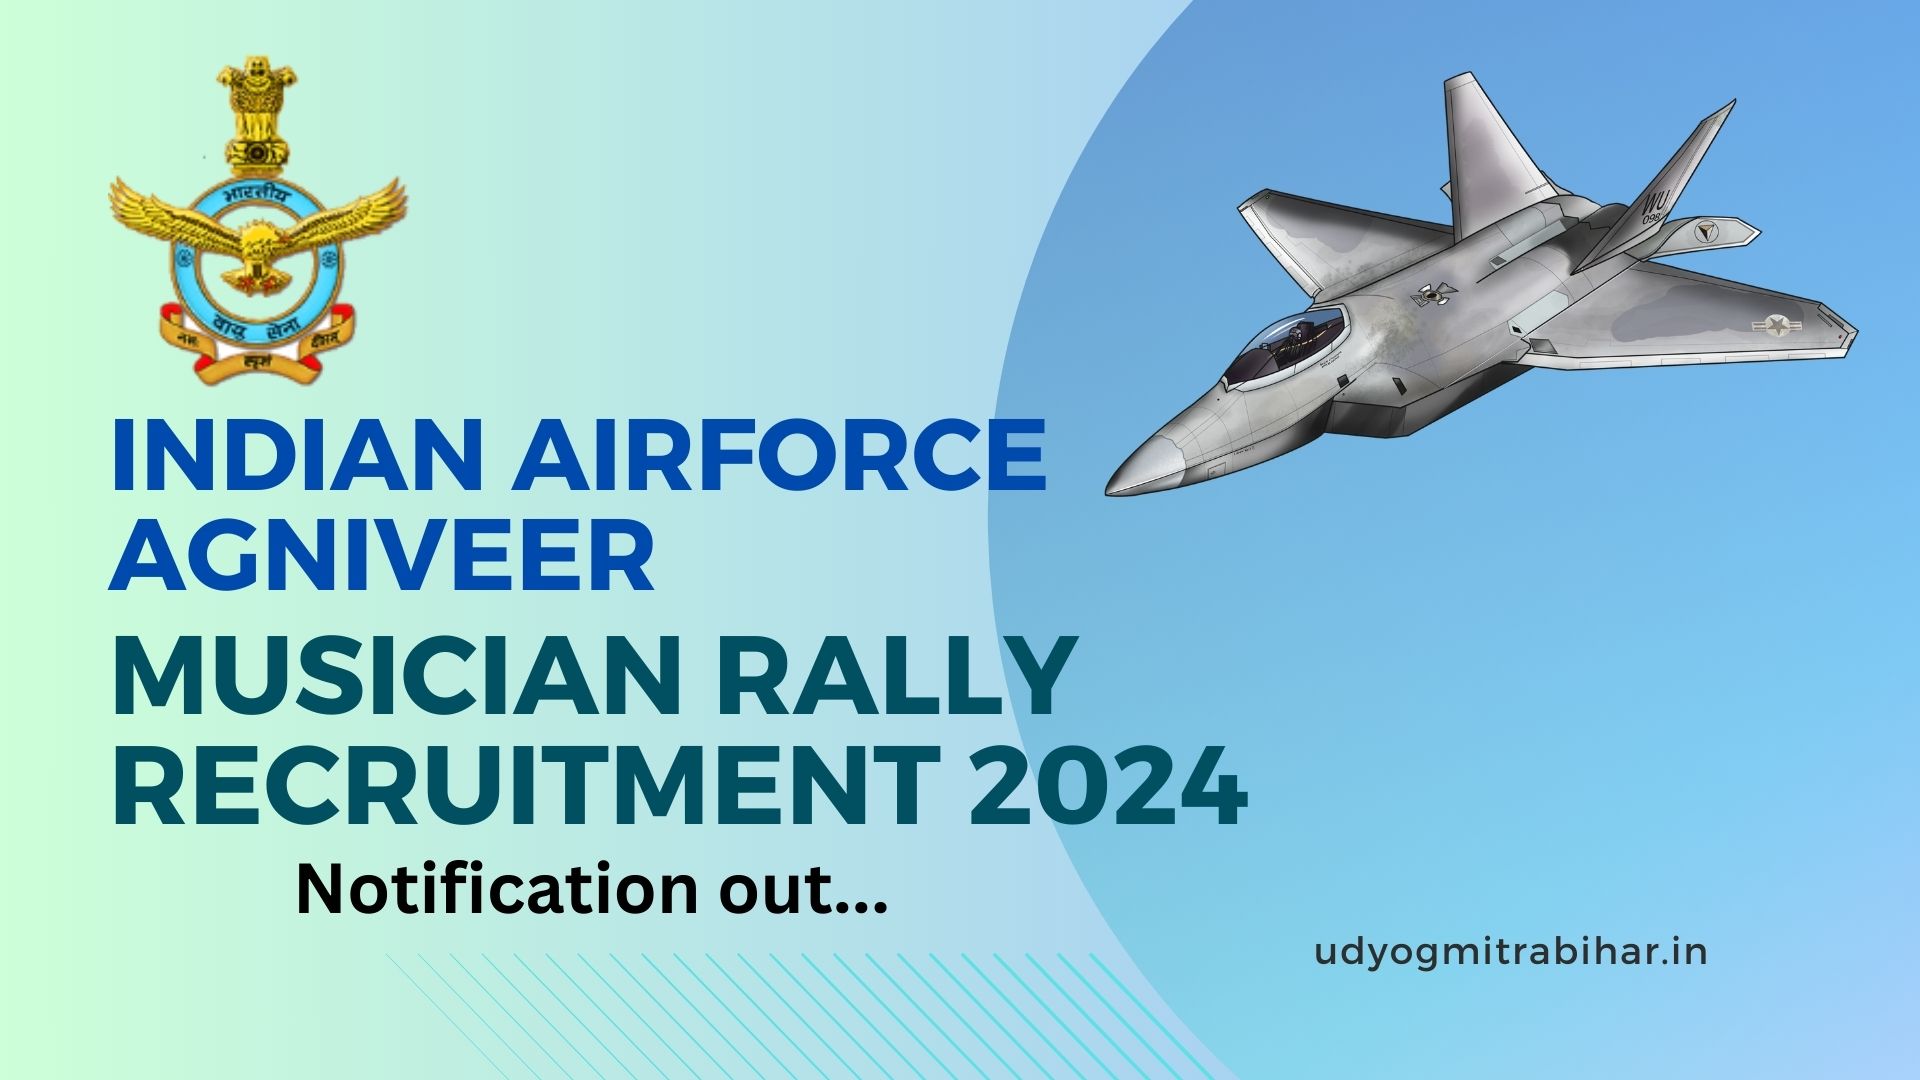 Indian Airforce Agniveer Musician Rally Recruitment, Apply Now, Eligibility Criteria, Required Documents